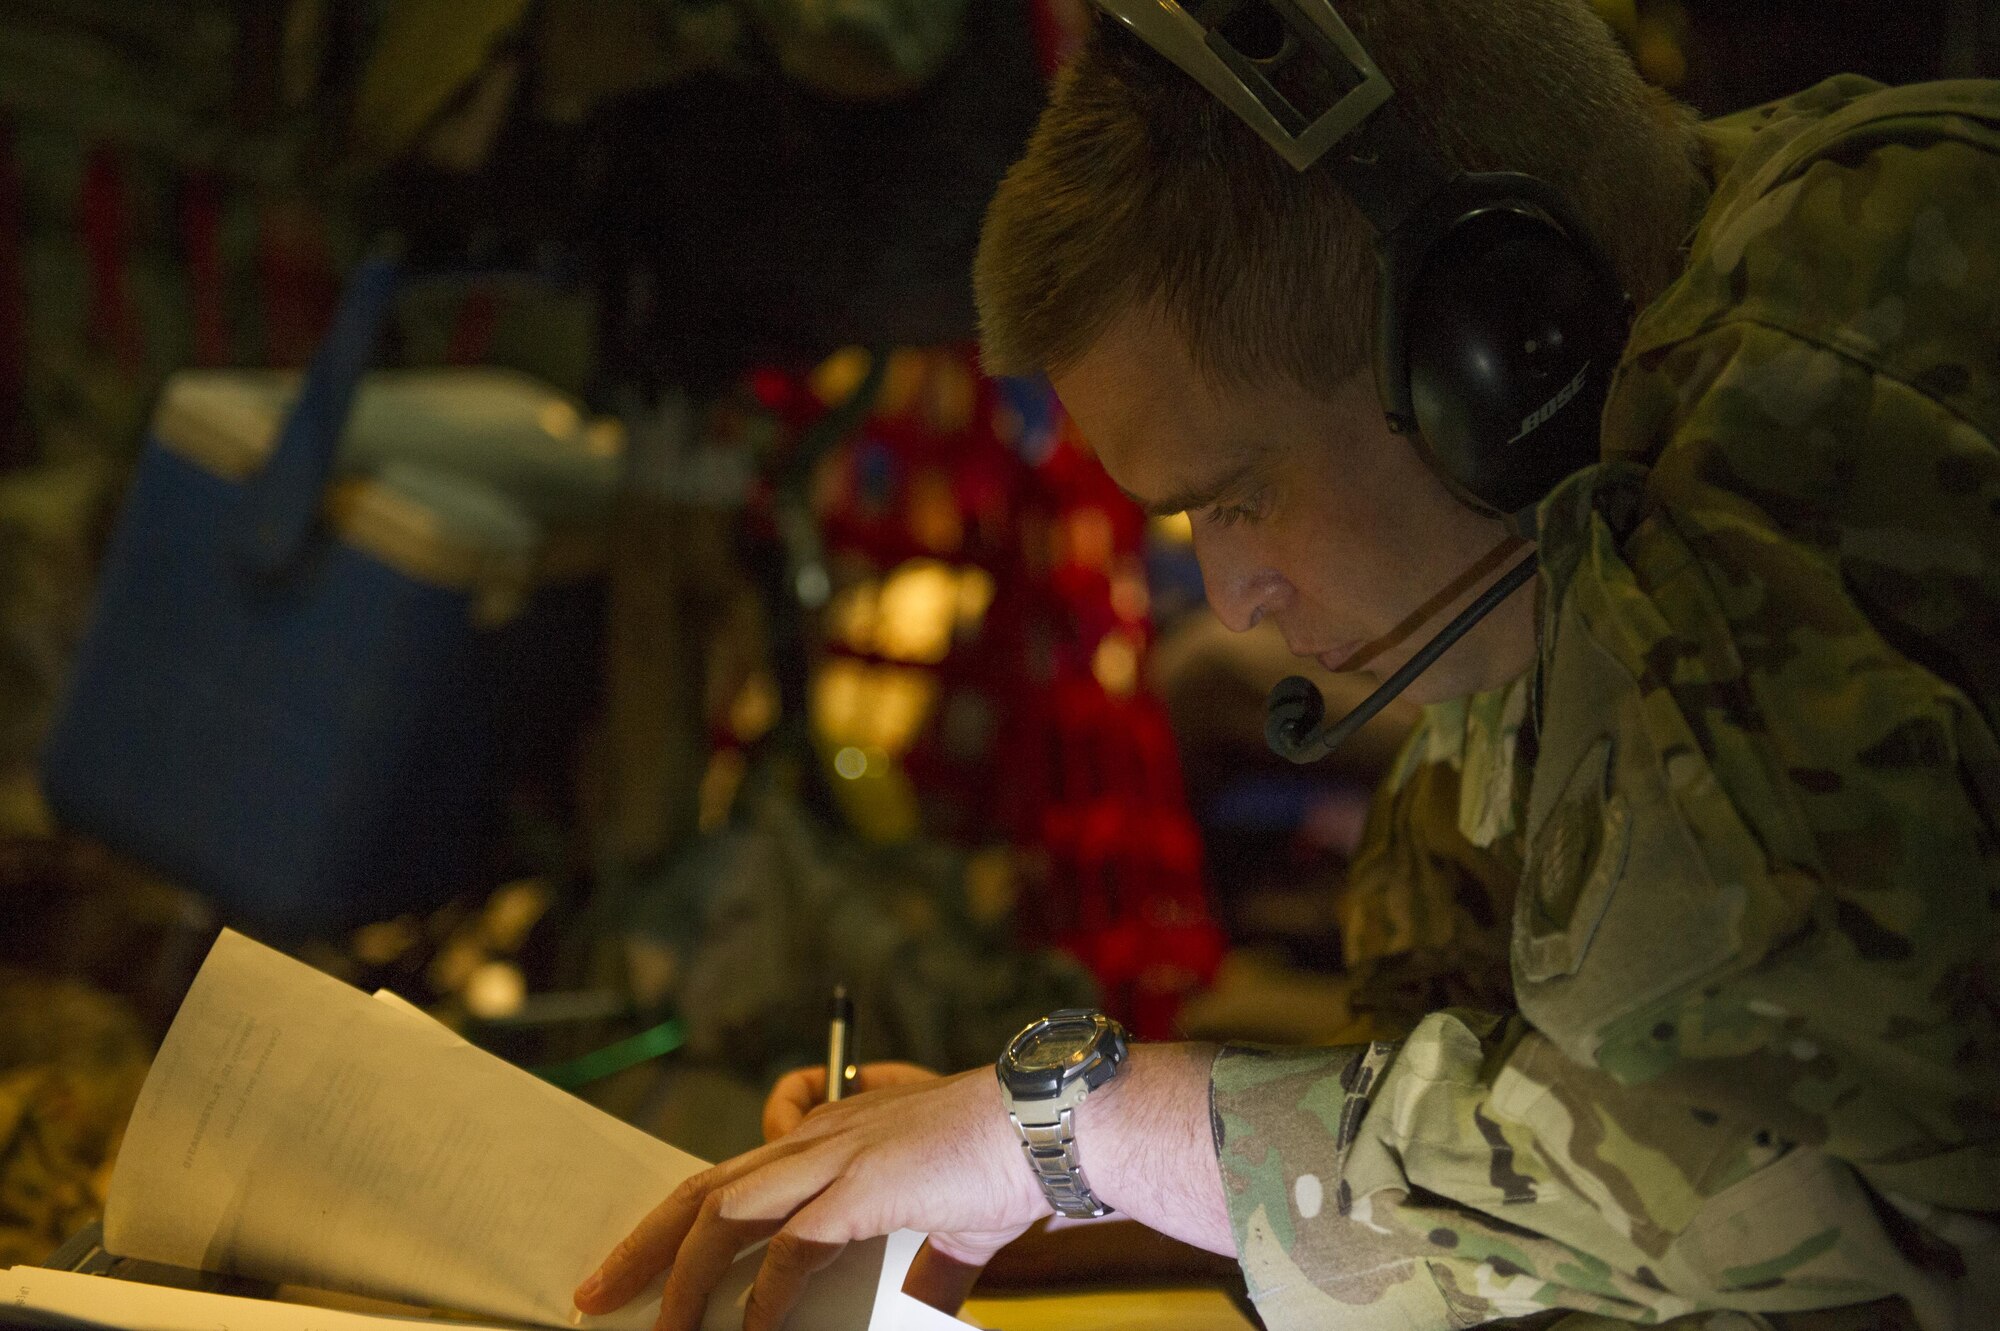 Maj. Jim Appel, 455th Expeditionary Aeromedical Evacuation Squadron flight nurse and medical crew director, deployed from the 18th AES at Kadena Air Base, Japan, fills out paperwork during a medevac alert en route to Al Udeid Air Base, Qatar, from Bagram Airfield, Afghanistan, Nov. 6, 2015. The 455th EAES is tasked with moving injured and sick patients to locations with higher levels of medical care. (U.S. Air Force photo by Tech. Sgt. Robert Cloys/RELEASED)